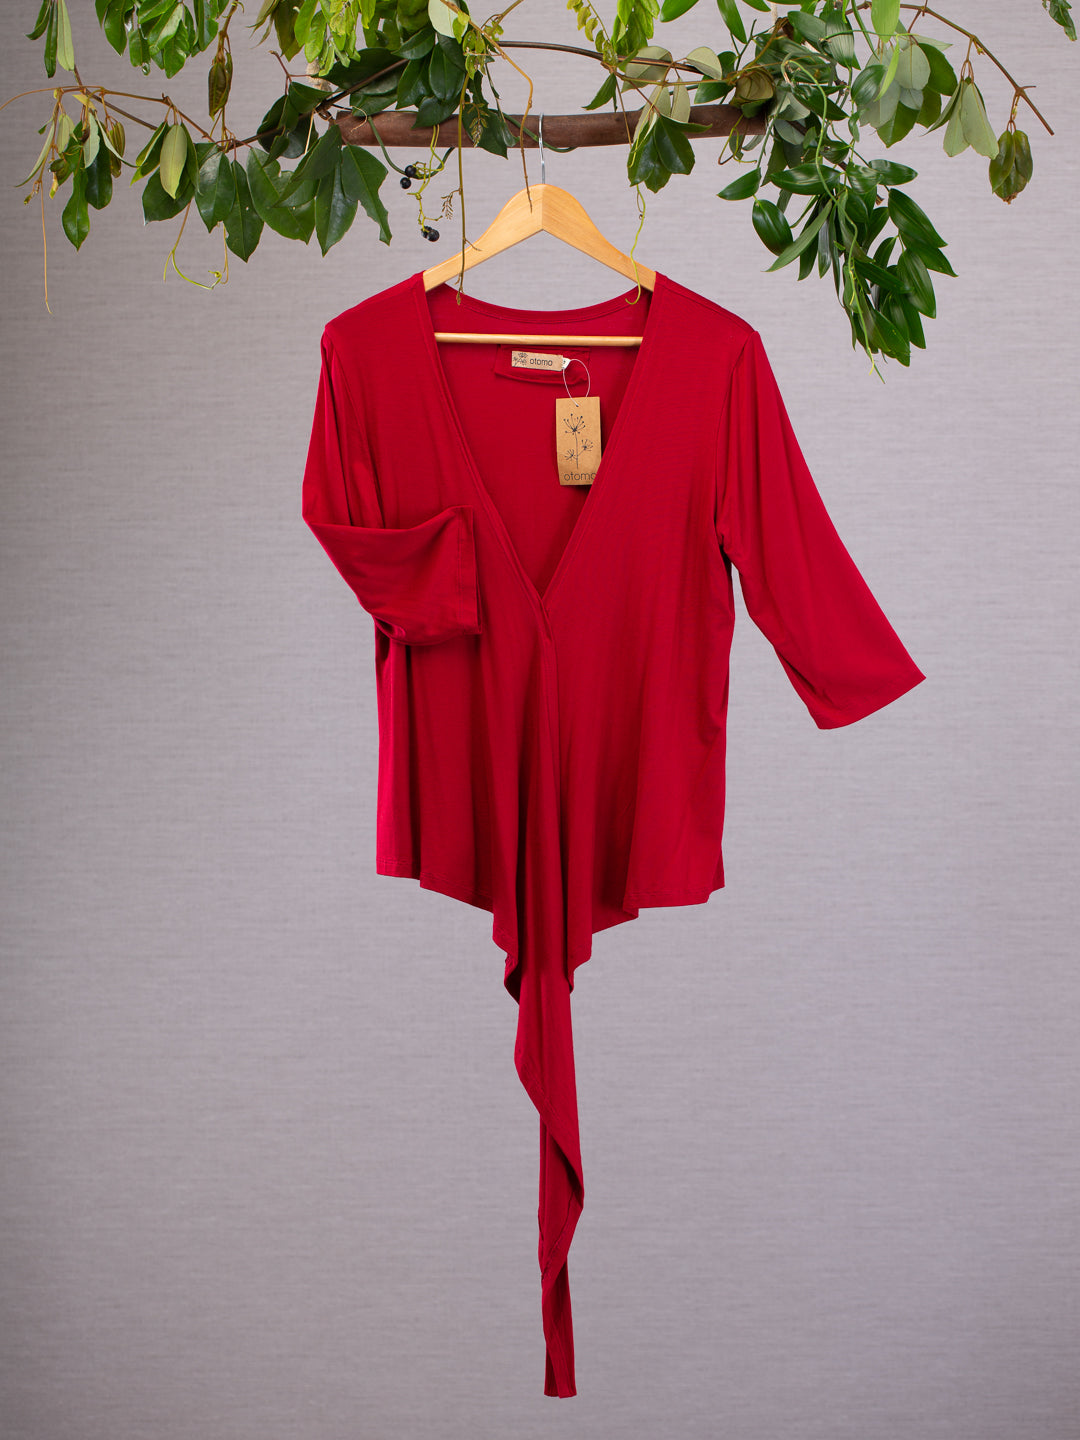 Red wrap-around top hanging on a hager with vines above.